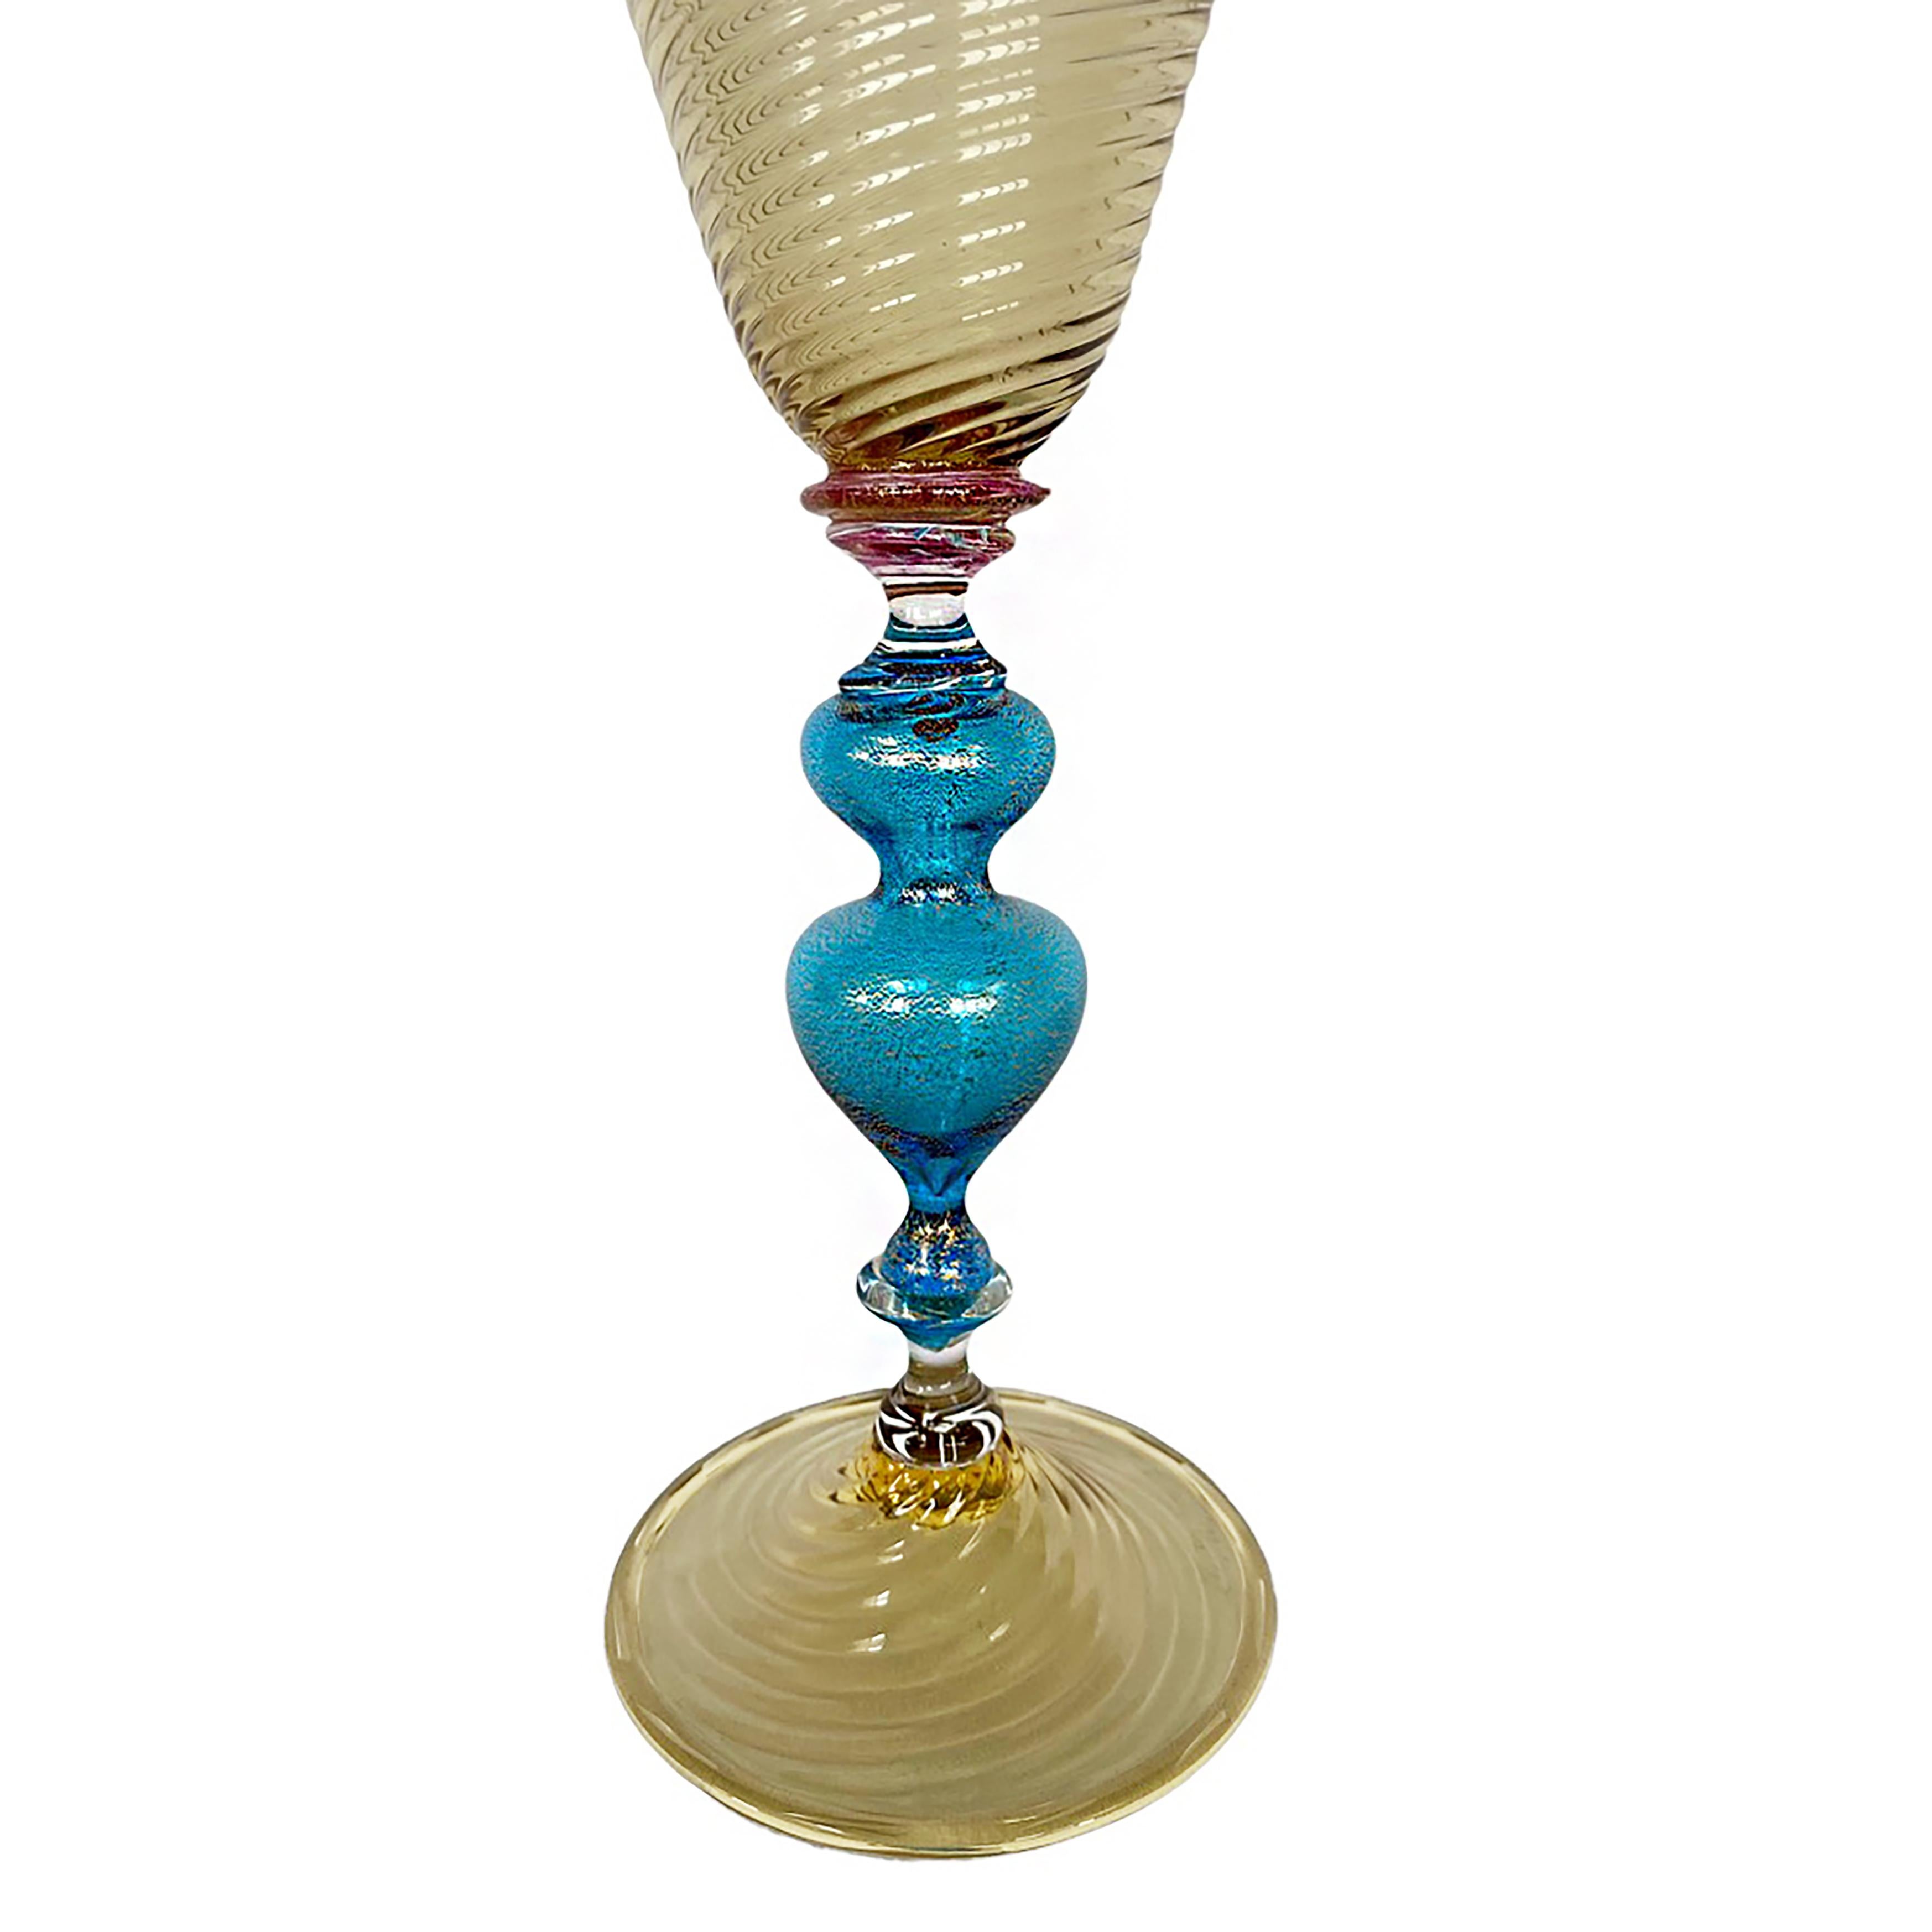 From Italy. Handmade and signed by Murano master glassmaker.
We have 15 of these gorgeous, highly-collectible art objects. All different, all one-of-a-kind. 
We will be listing all 15. Most have different signatures representing different Murano